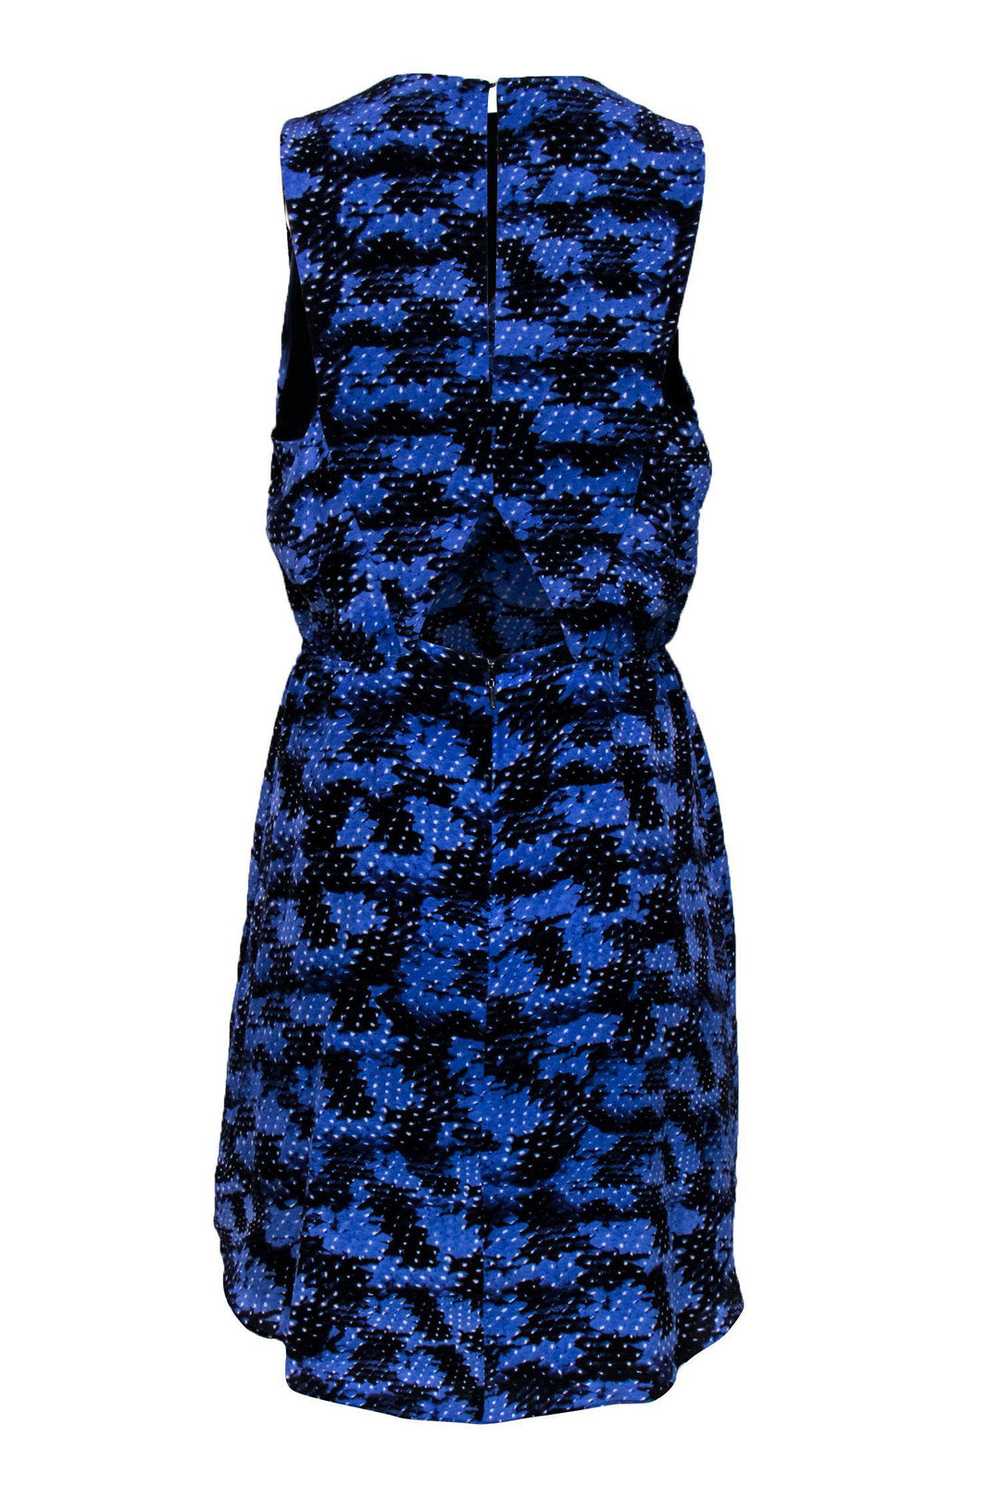 Rebecca Taylor - Blue & Black Abstract Print Dres… - image 3